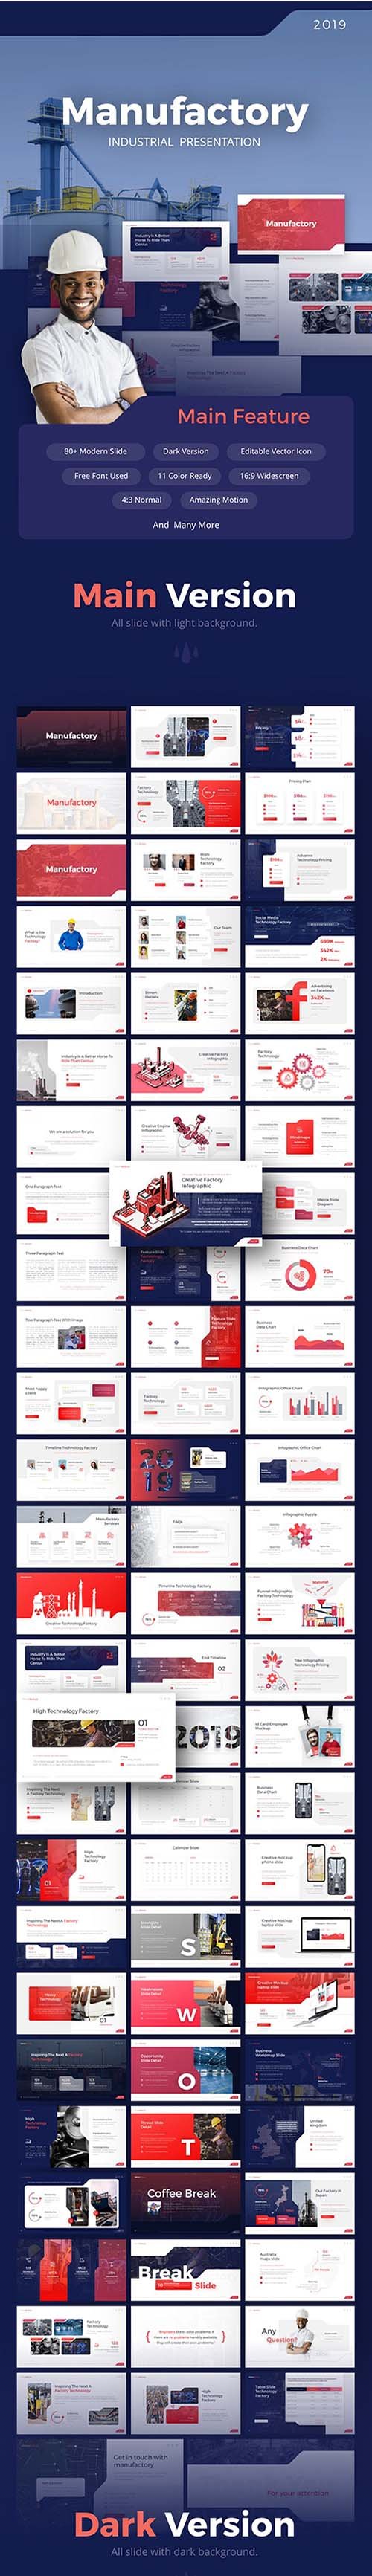 Manufactory Industry PowerPoint Template